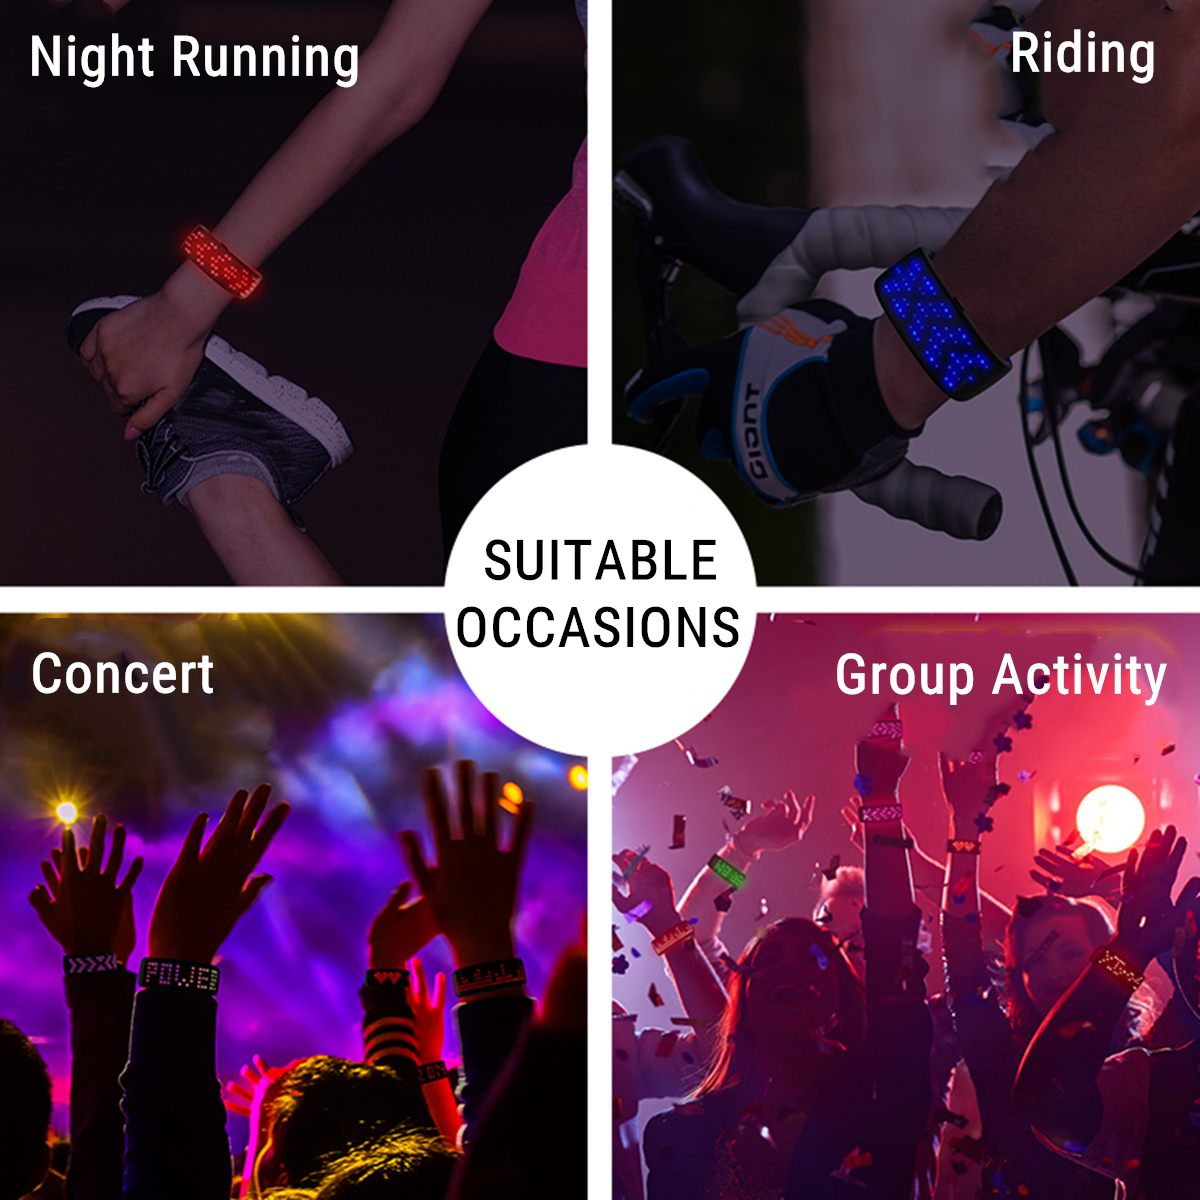 Cheering-Colorful-Display-Dynamic-LED-Luminous-Bracelet-Night-Running-Concert-Party-Props-Bracelet-1652102-4